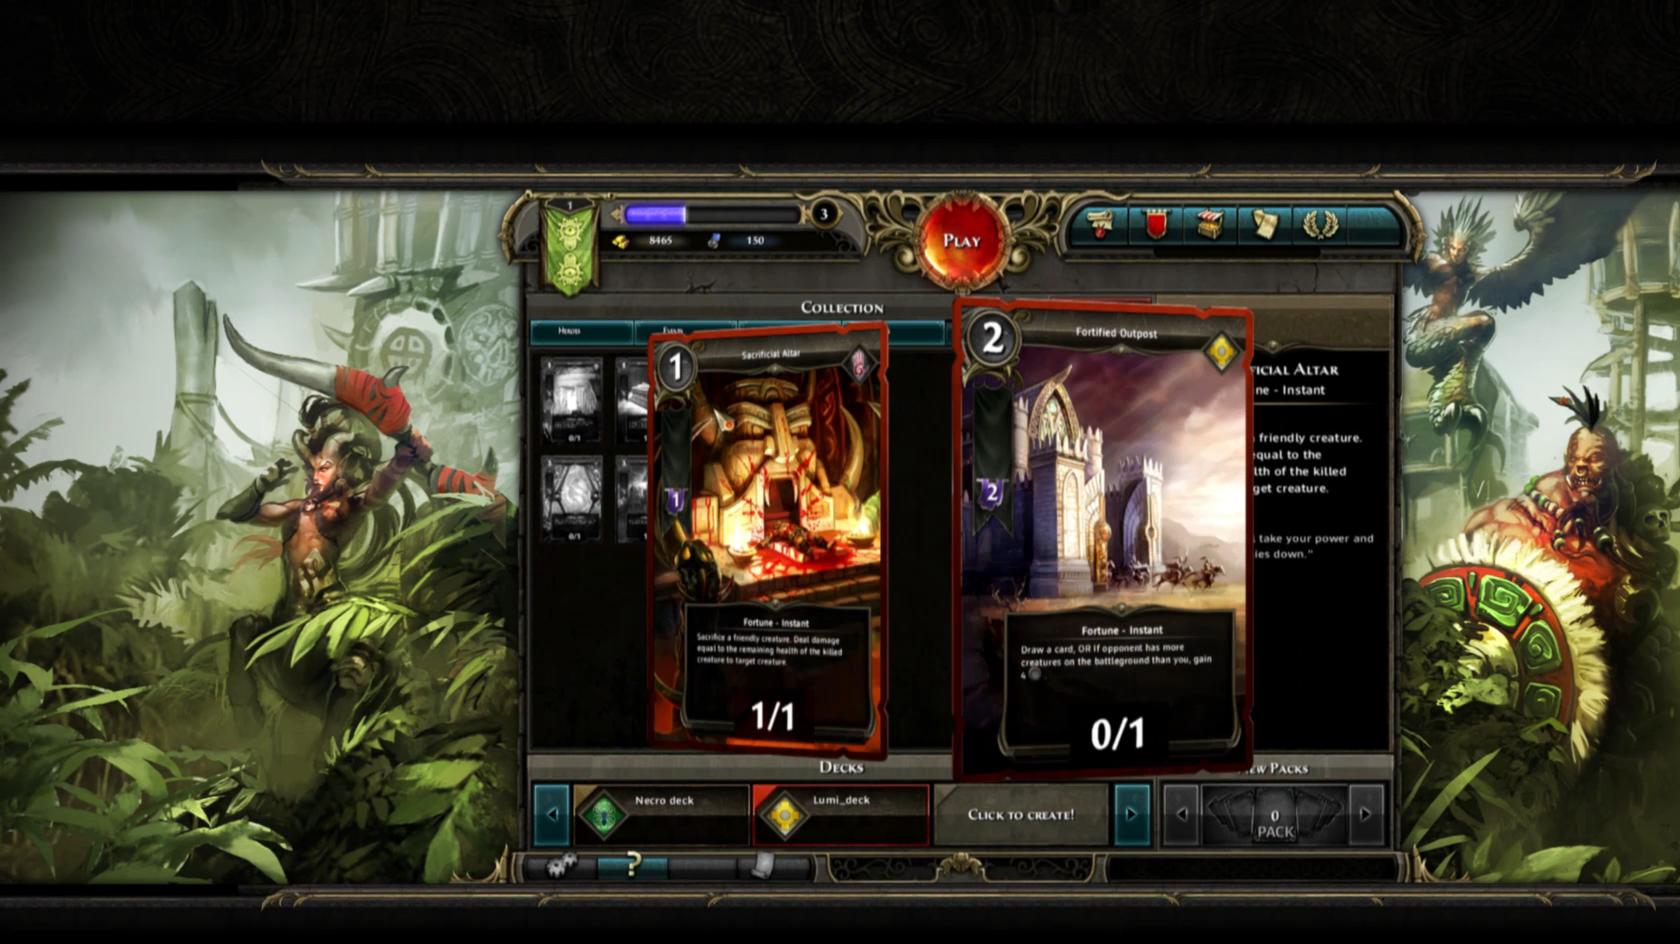 Screenshot 7 of Might and Magic Duel of Champions - Open Beta Trailer